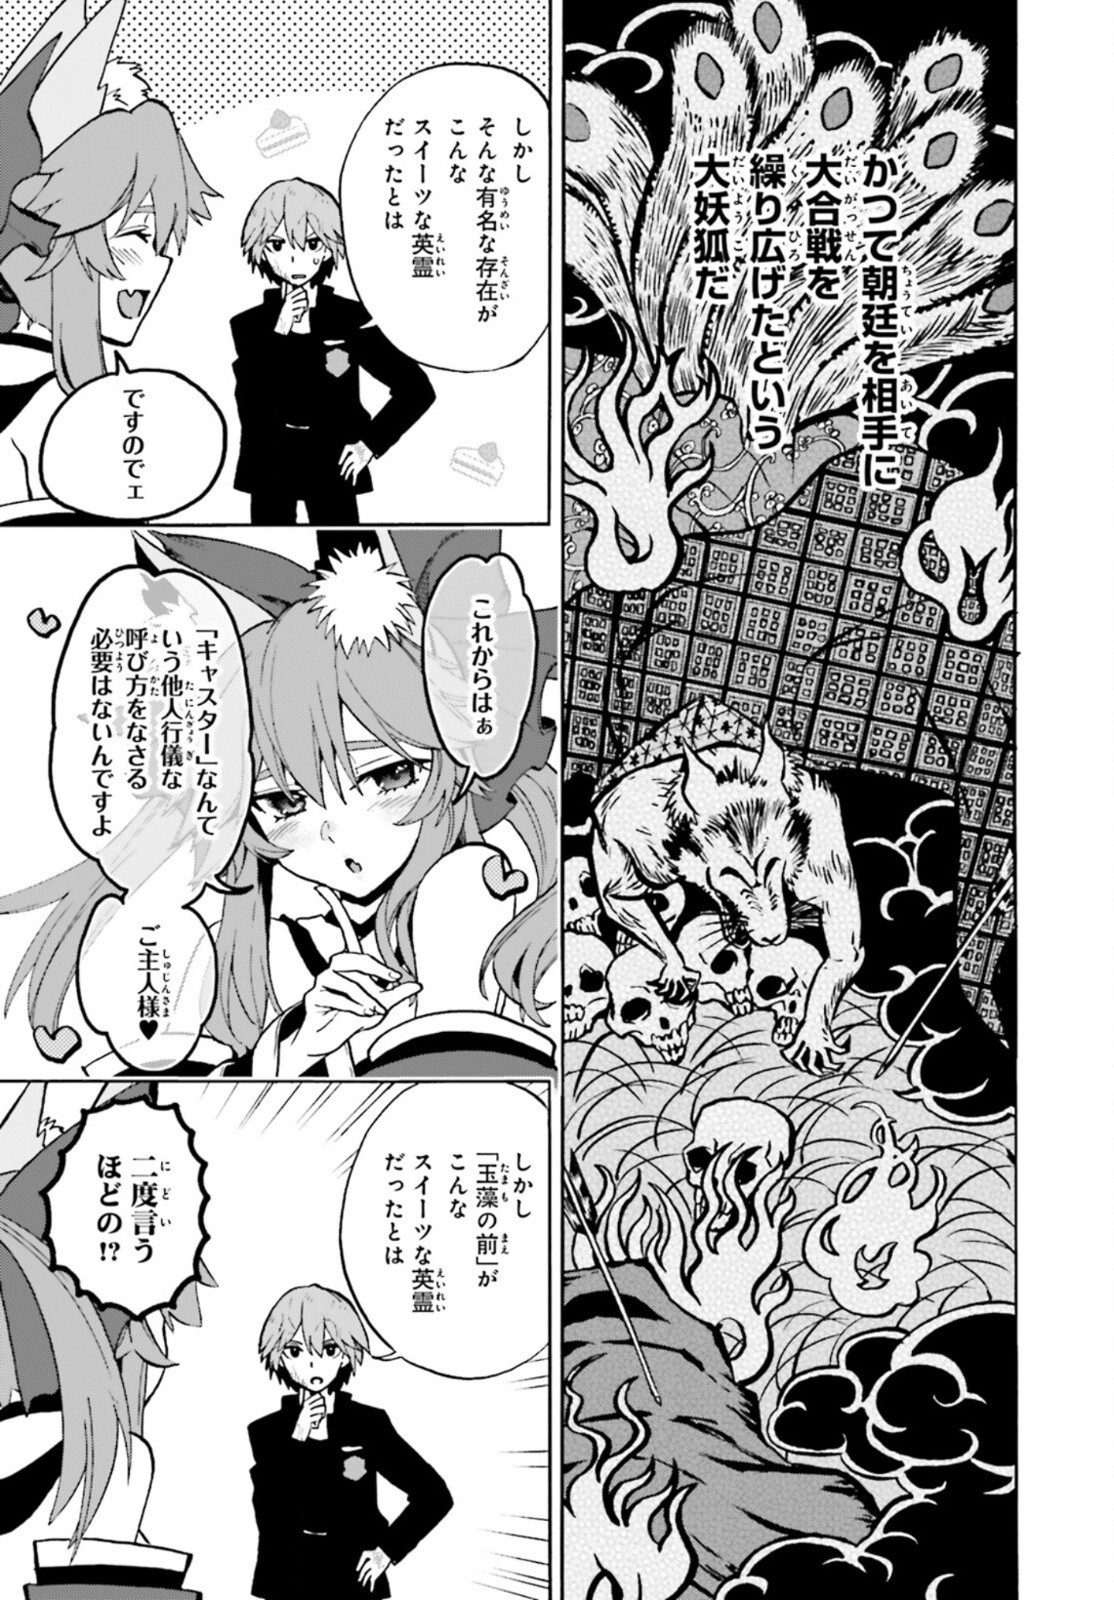 Fate/Extra CCC Fox Tail - Chapter 72 - Page 3